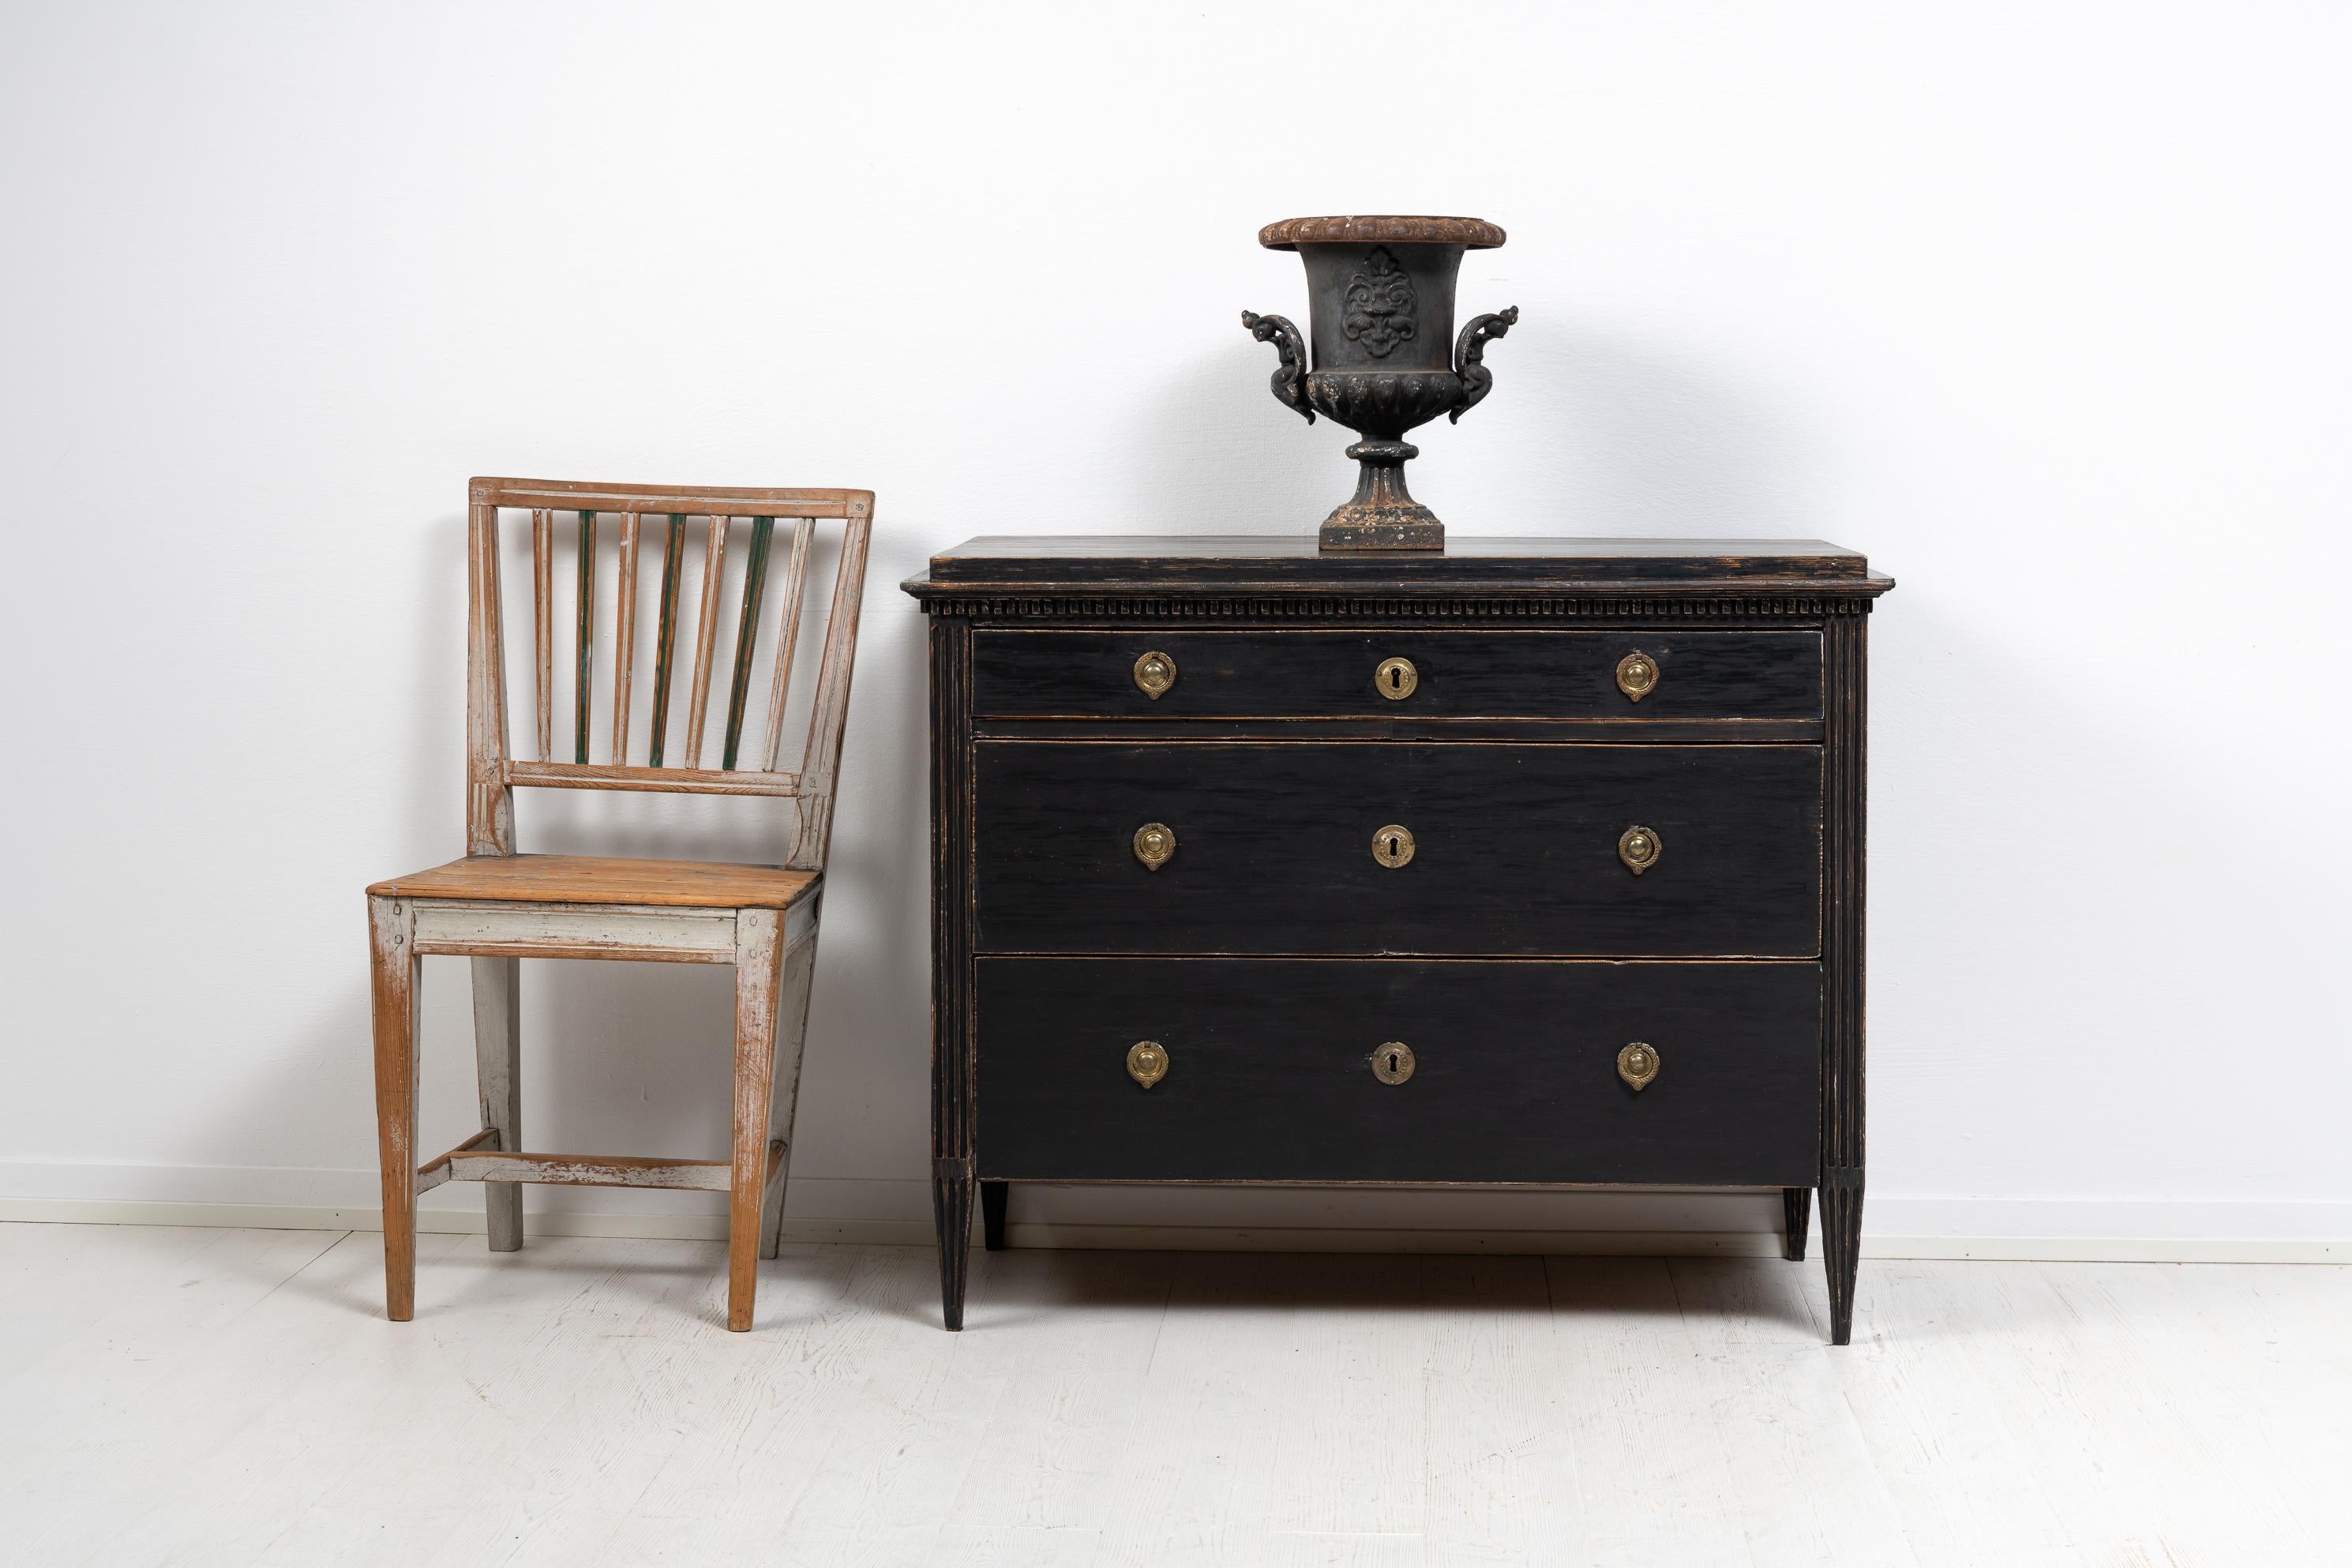 Gustavian black bureau from Sweden made during the last years of the 18th century, around 1790 to 1800. Made in painted pine where the paint has distress and patina causing the pine to shine trough in places. The bureau has straight tapered legs and